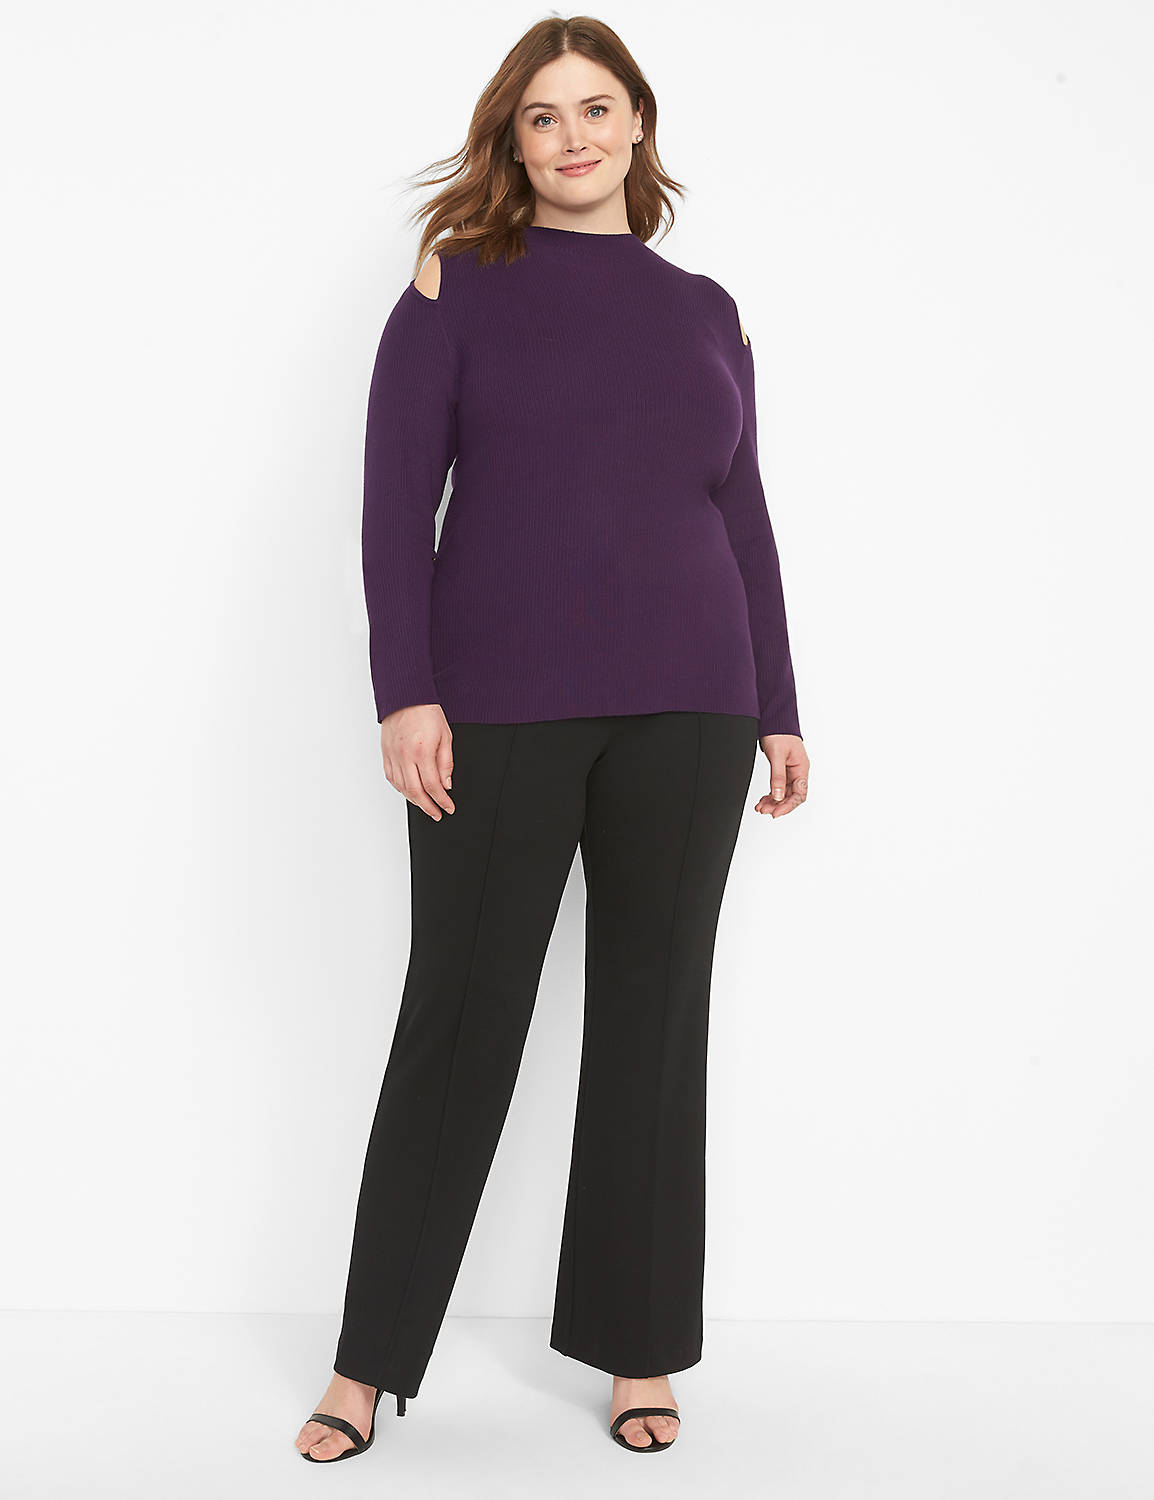 Long Sleeve Mock Neck Cut Out Rib Pullover 1124485:PANTONE Purple Pennant:10/12 Product Image 3